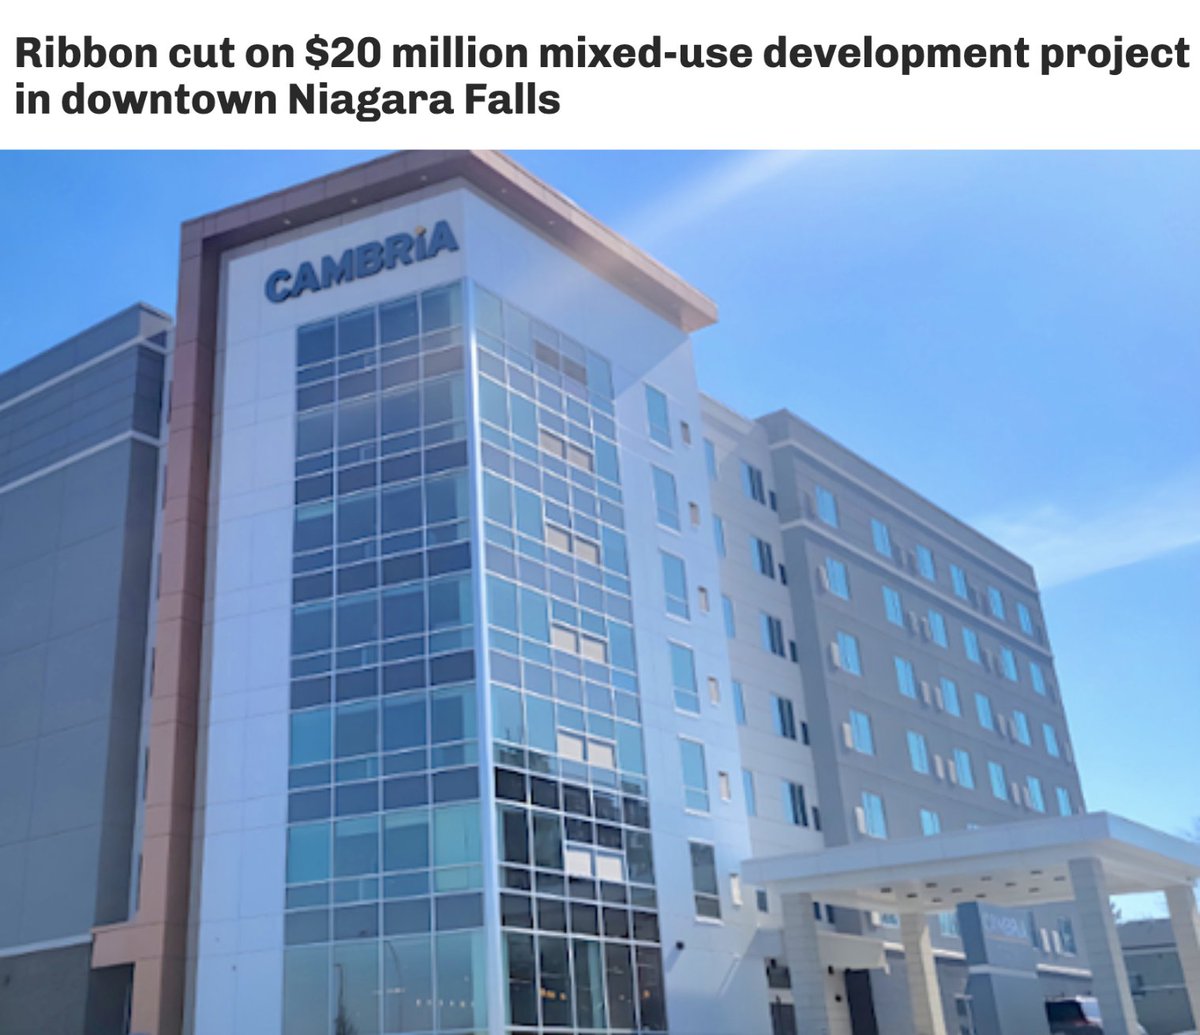 The Cambria Hotel will offer premier accommodations in the heart of Niagara Falls, attracting more visitors to our area and enhancing their stay while enjoying our local shops, restaurants, and many other businesses as well. #District62 Read more⬇️ wnypapers.com/news/article/c…